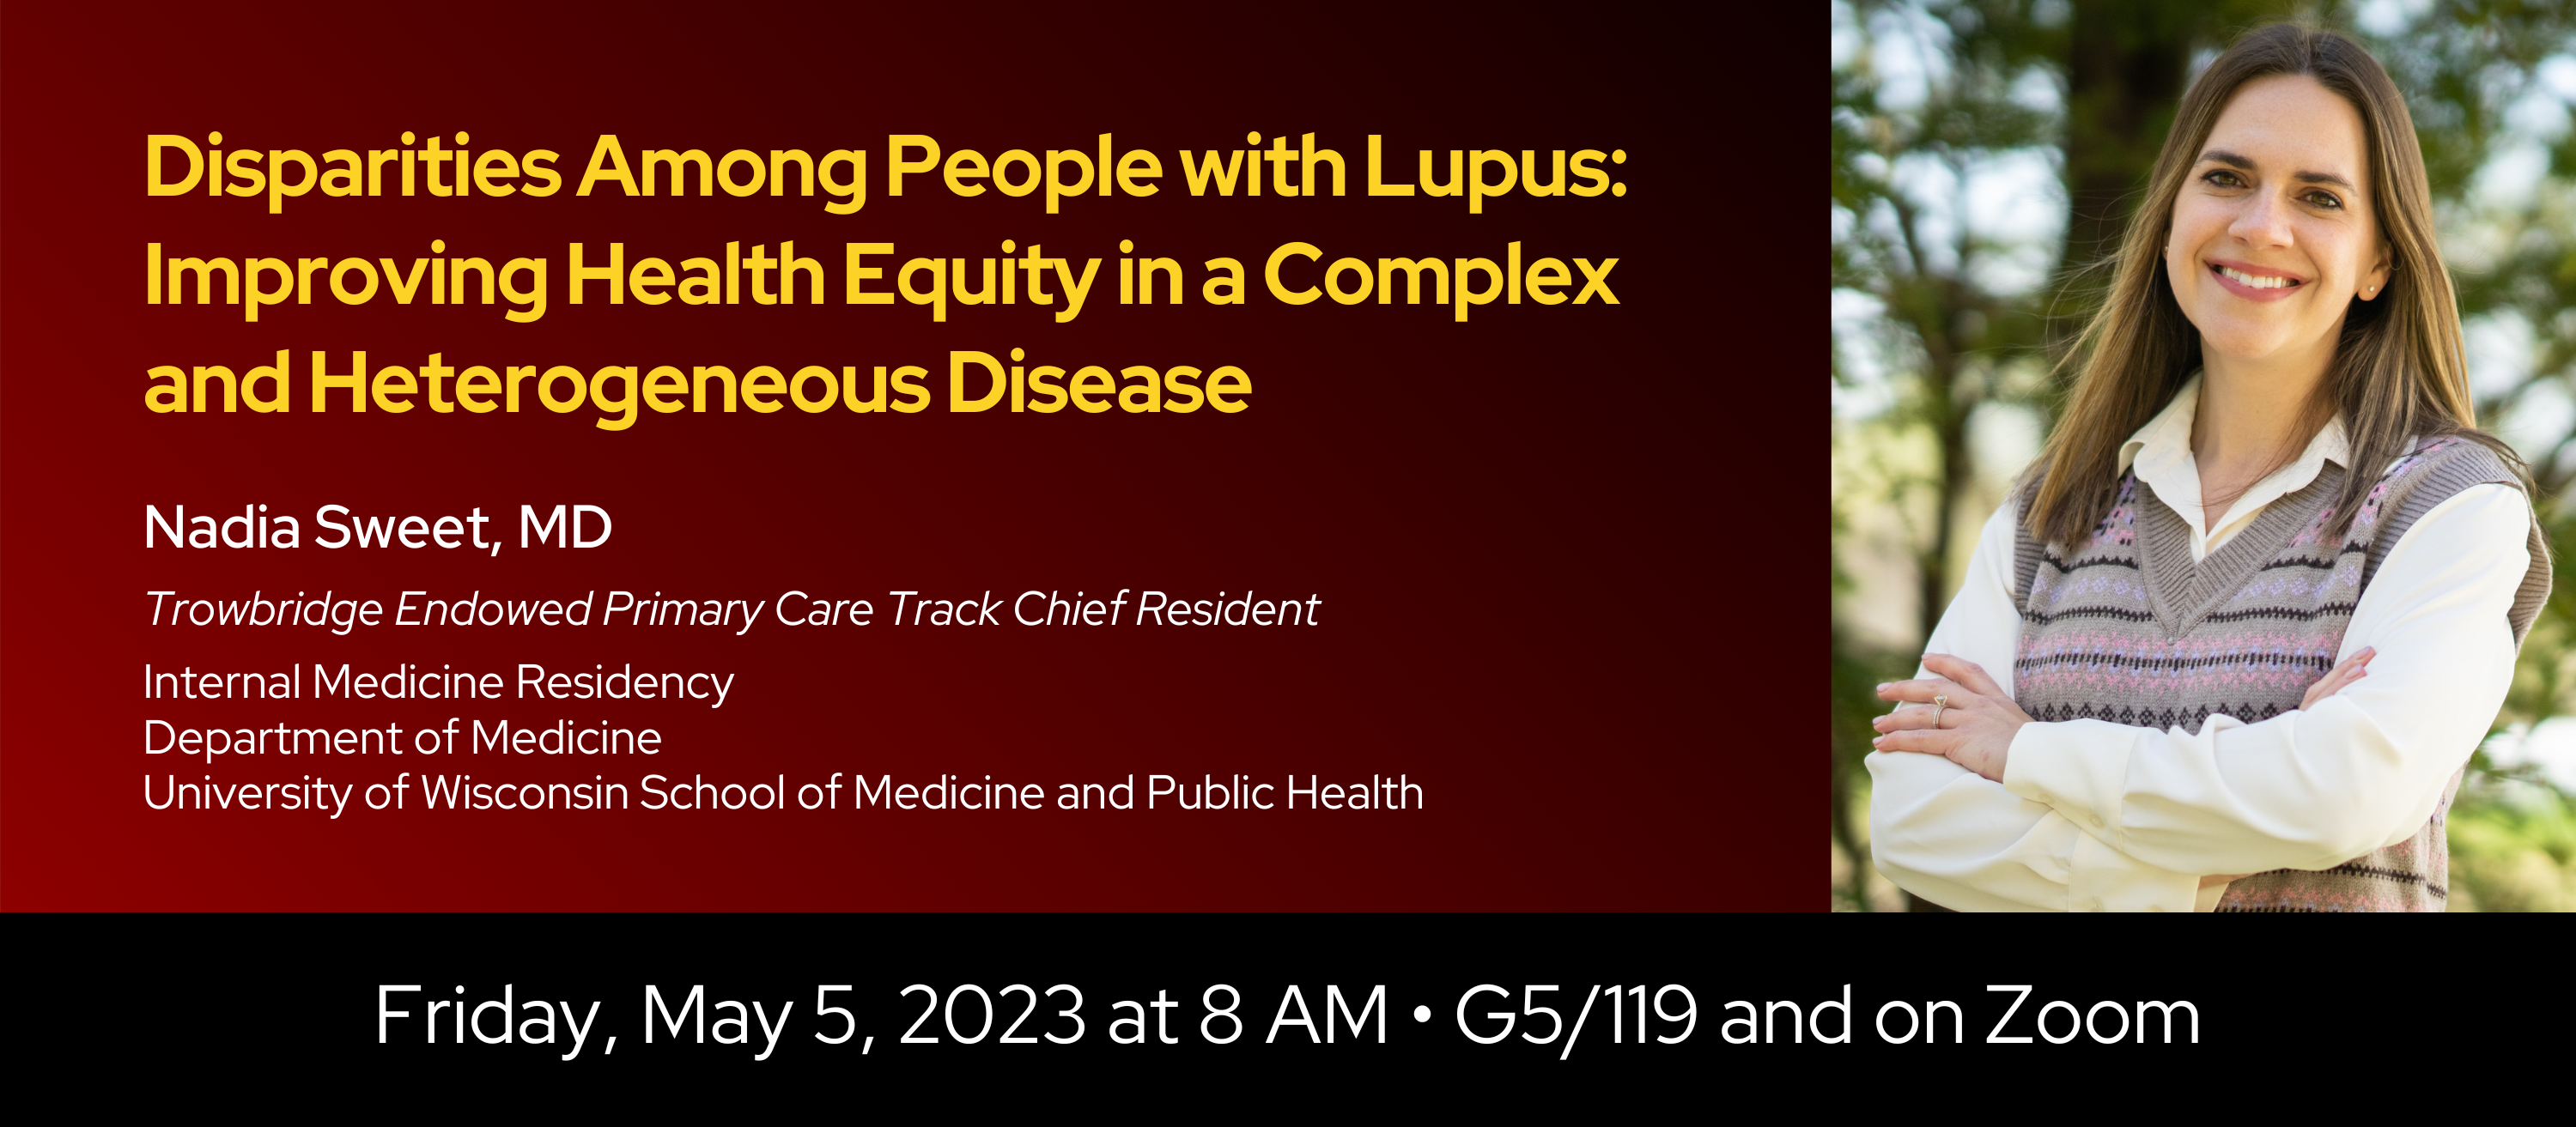 Title: Disparities Among People with Lupus: Improving health Equity in a Complex and Heterogeneous Disease